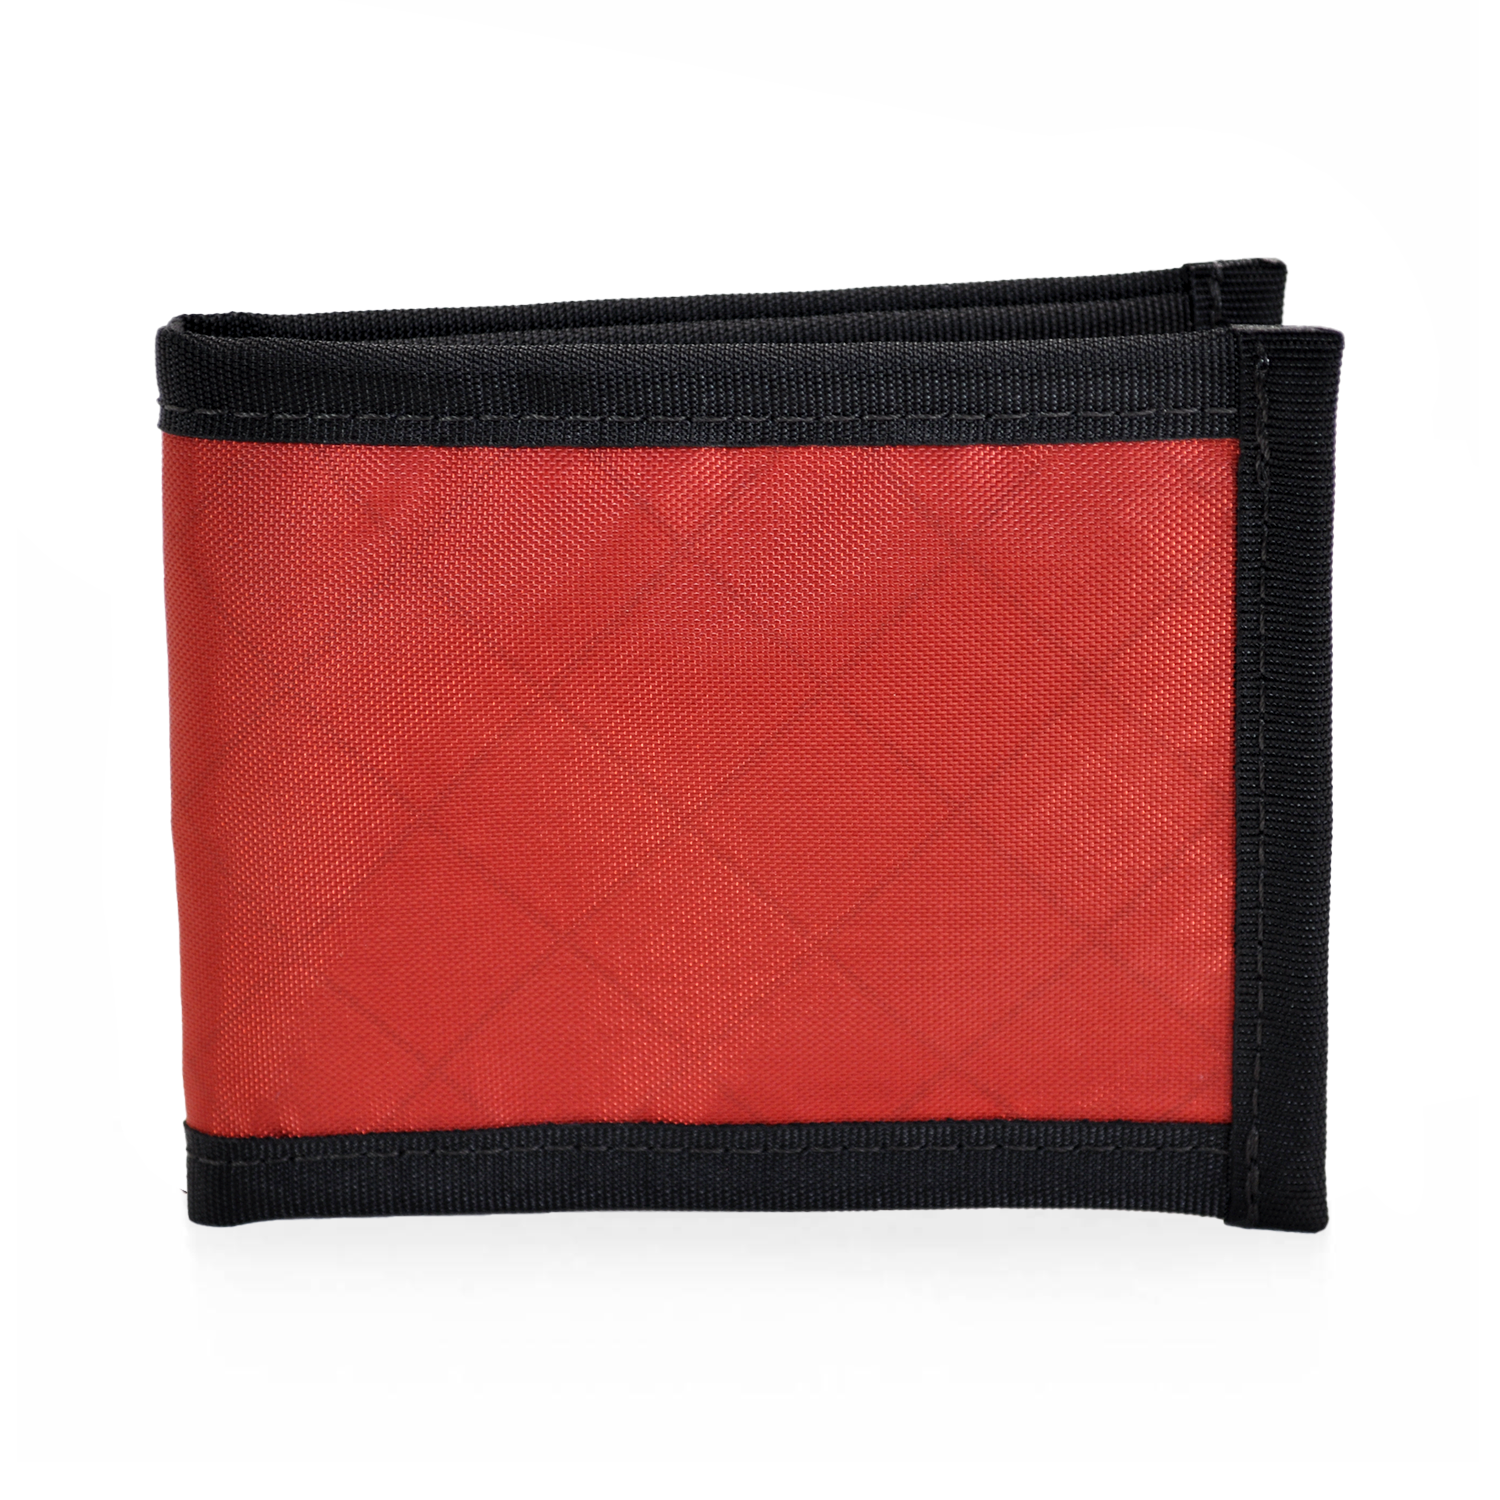 Flowfold Vanguard Bifold Wallet Made in USA, Maine by Flowfold of Recycled Polyester EcoPak Fabric, Brick Red